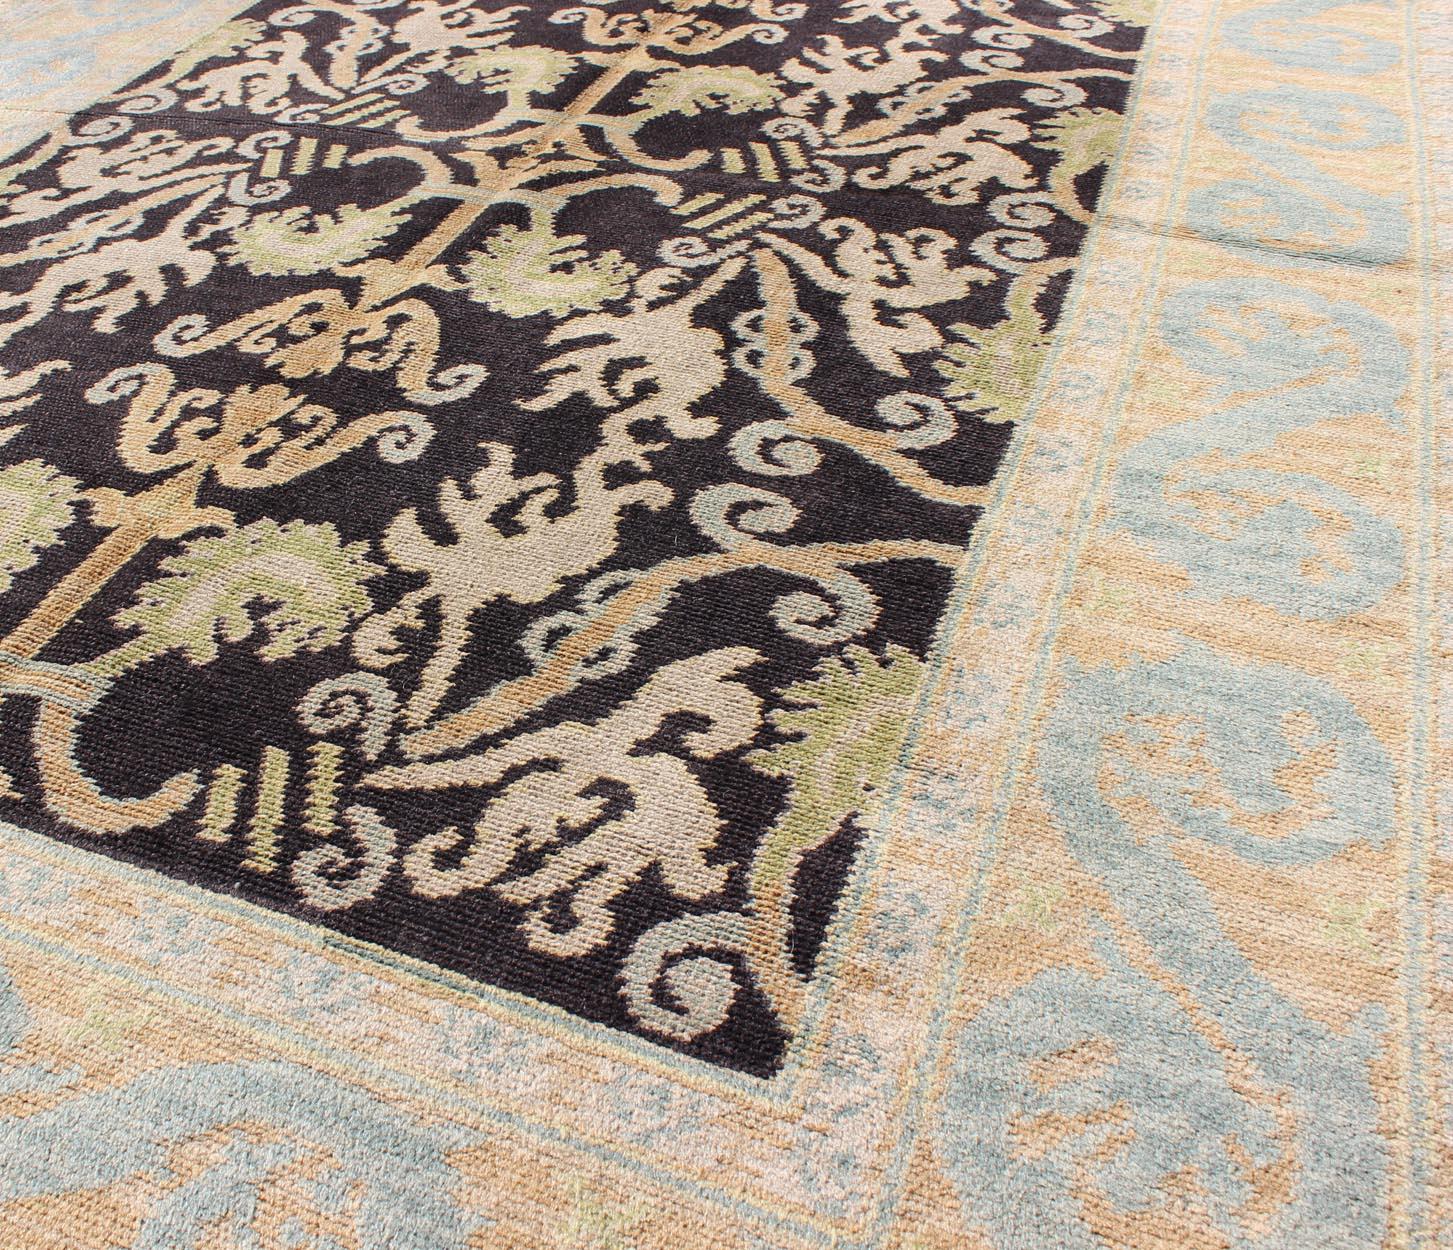 Spanish Colonial Antique Spanish Rug with All-Over Botanicals in Black, Light Blue, Light Green For Sale